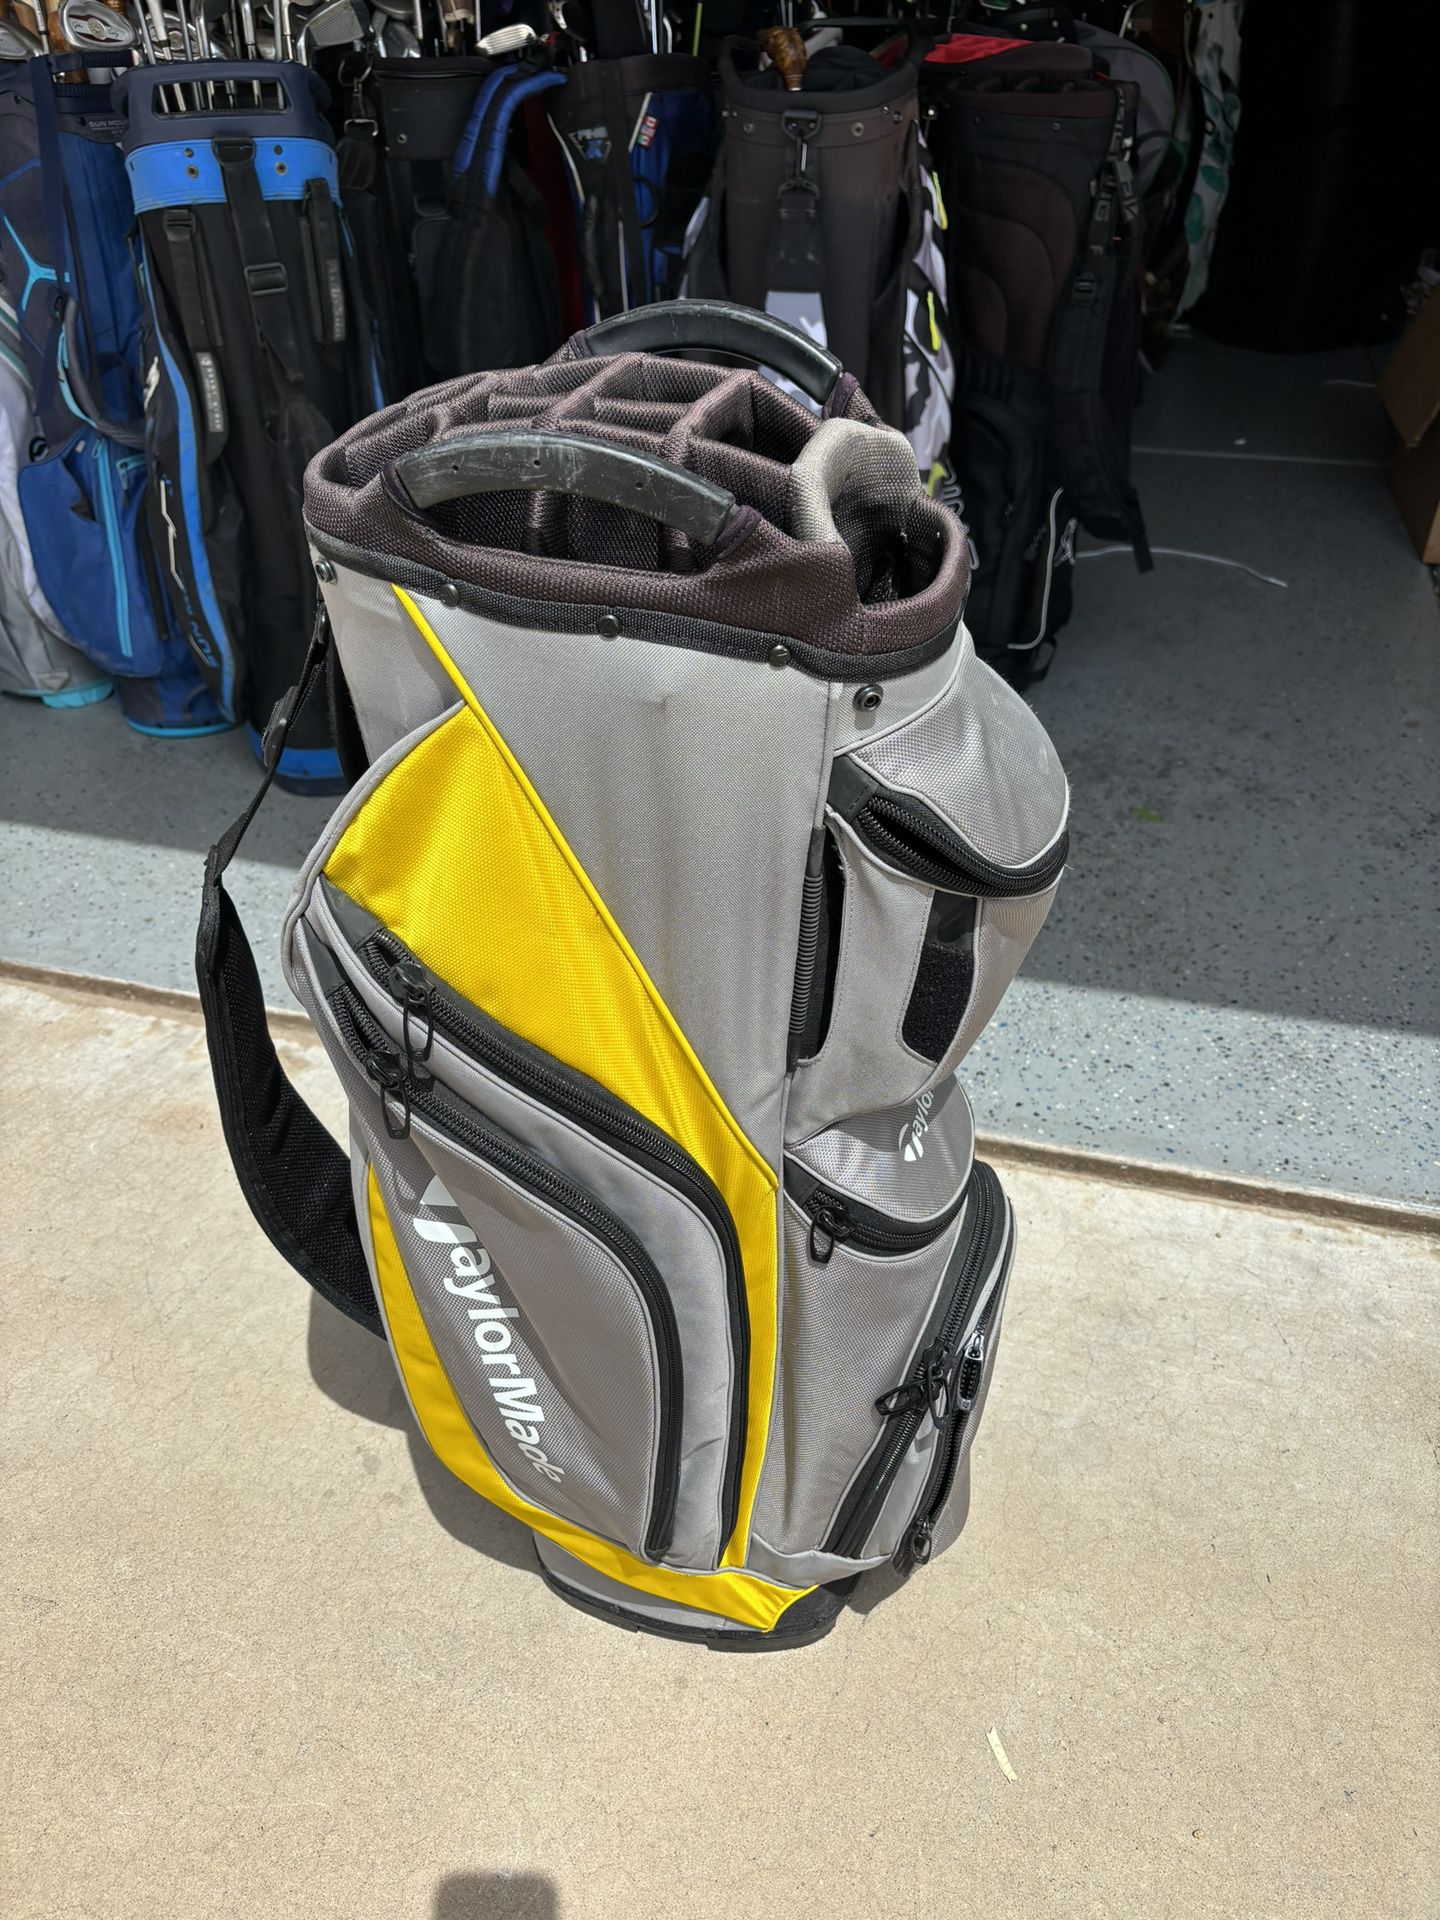 TAYLORMADE 14 COMPARTMENT GOLF CERT BAG WITH COOLER 